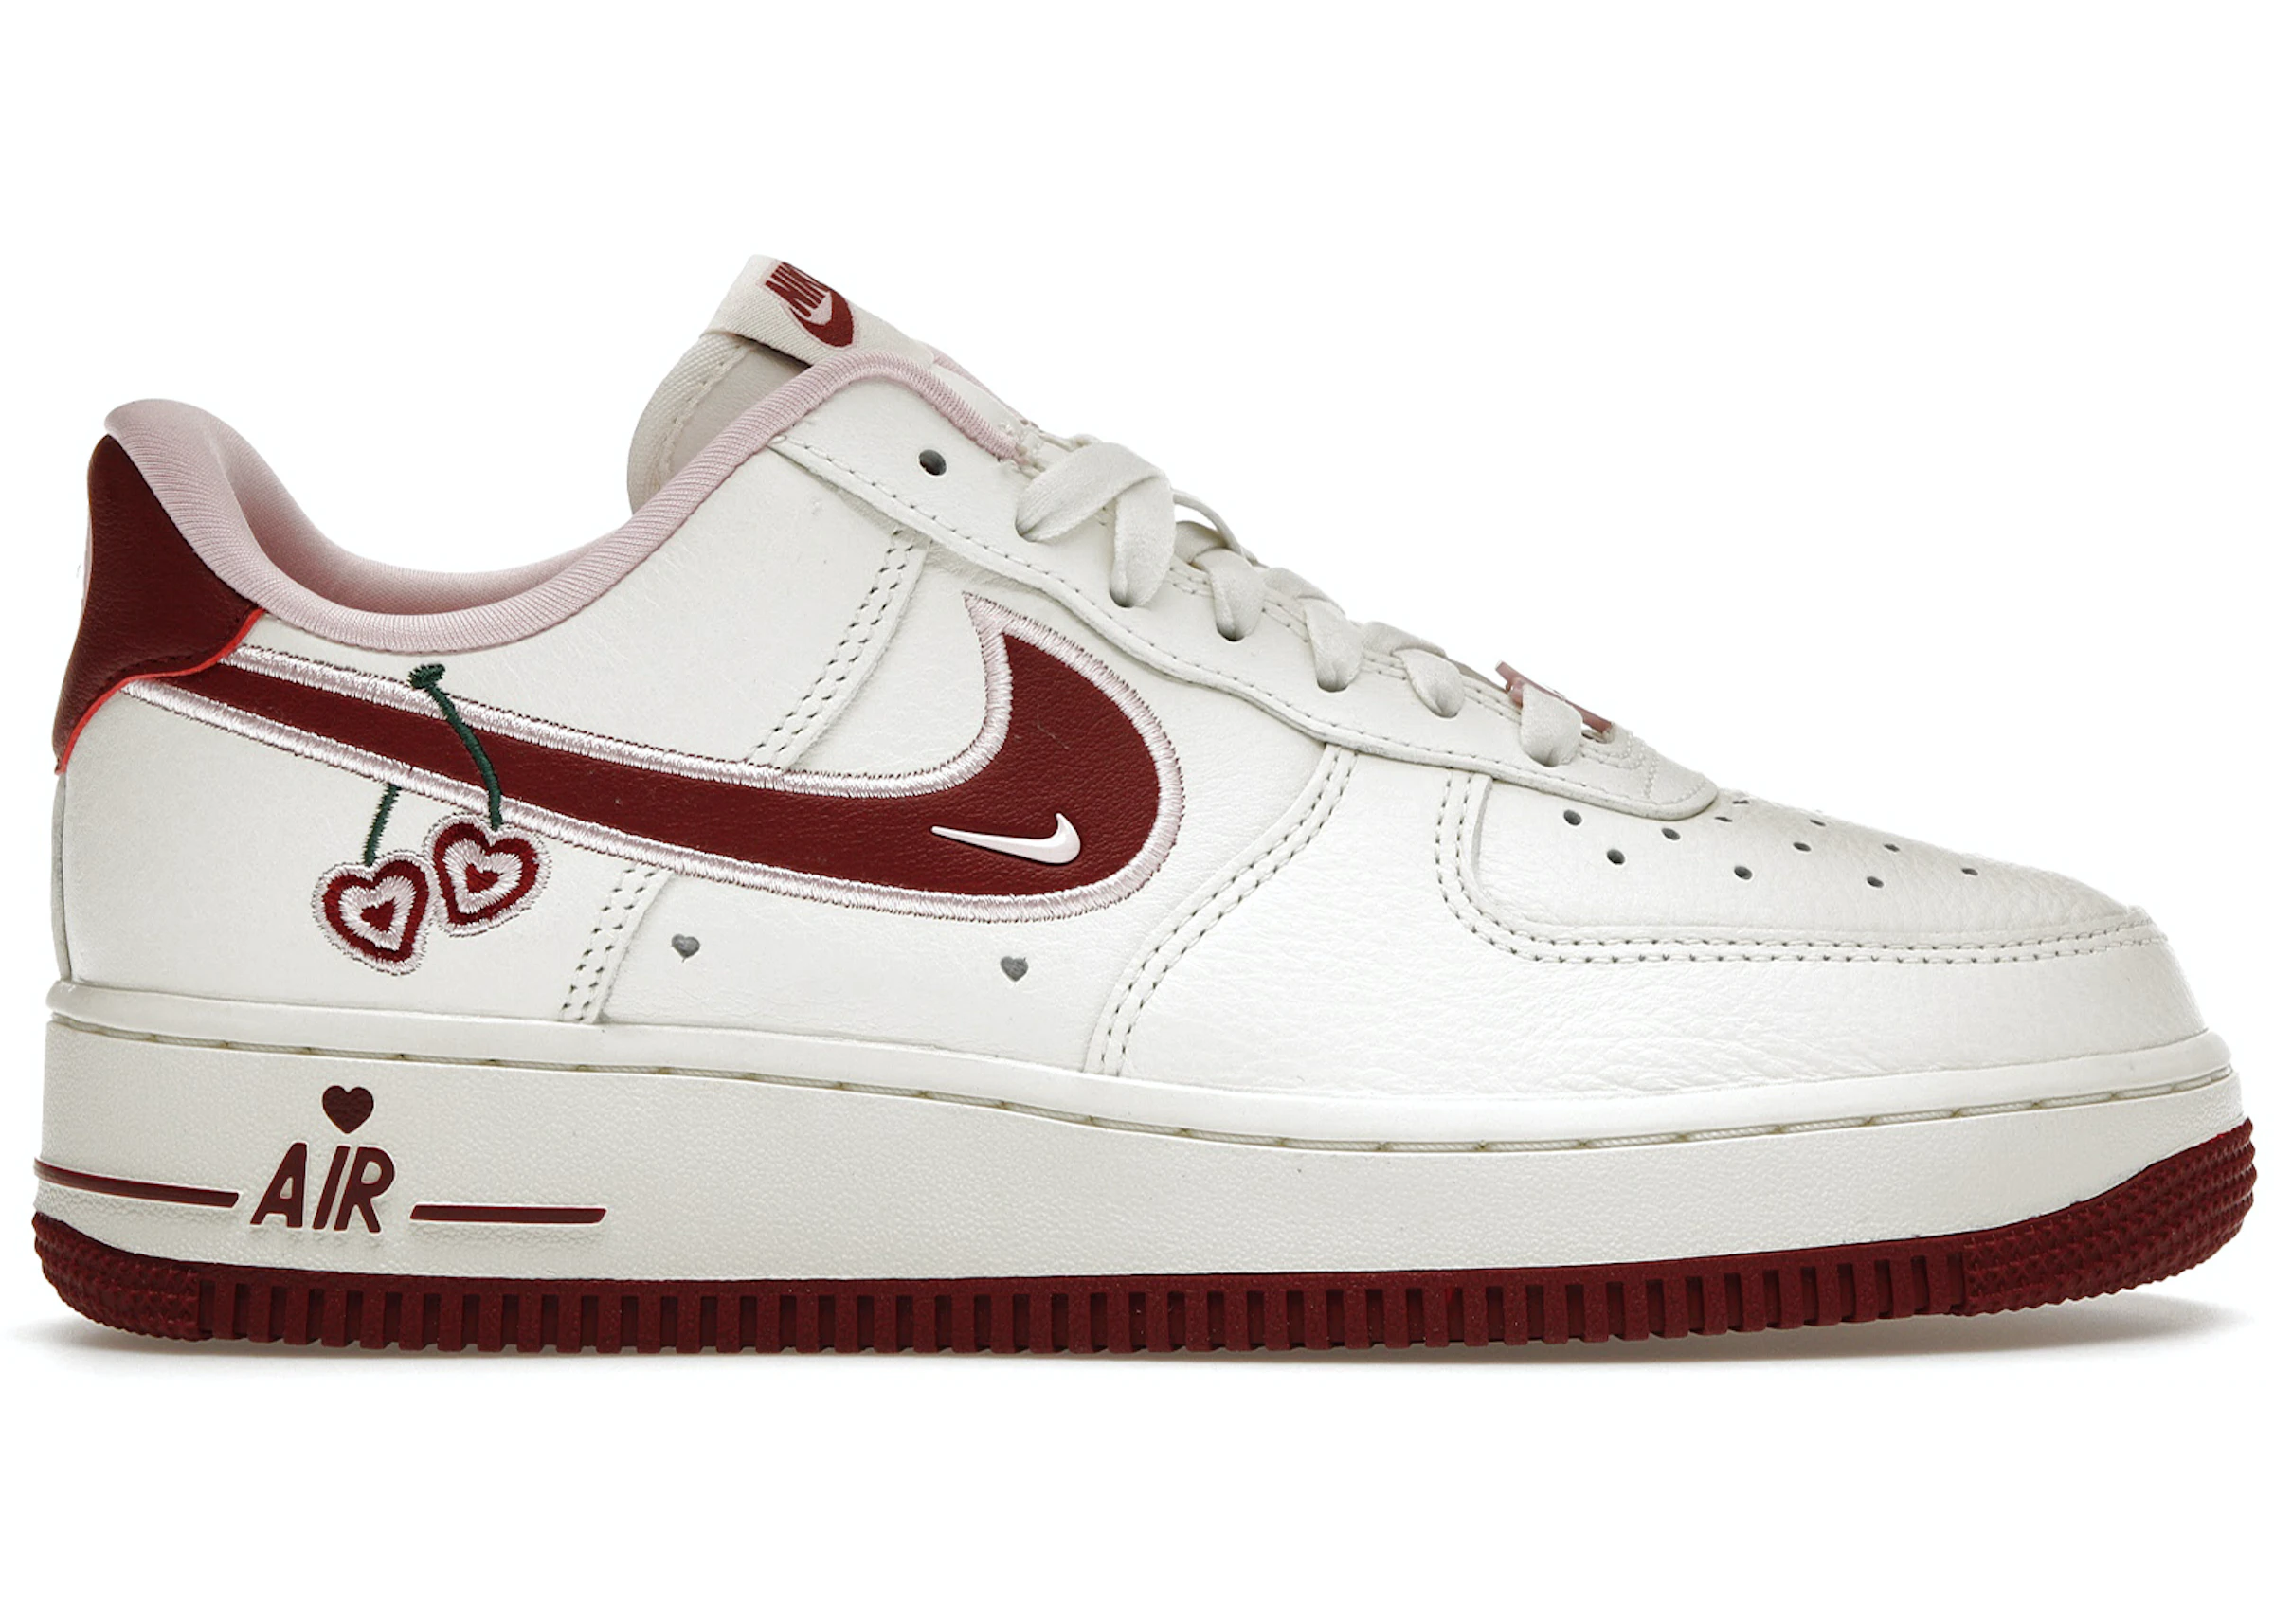 Nike Air Force 1 Sneakers - Stockx